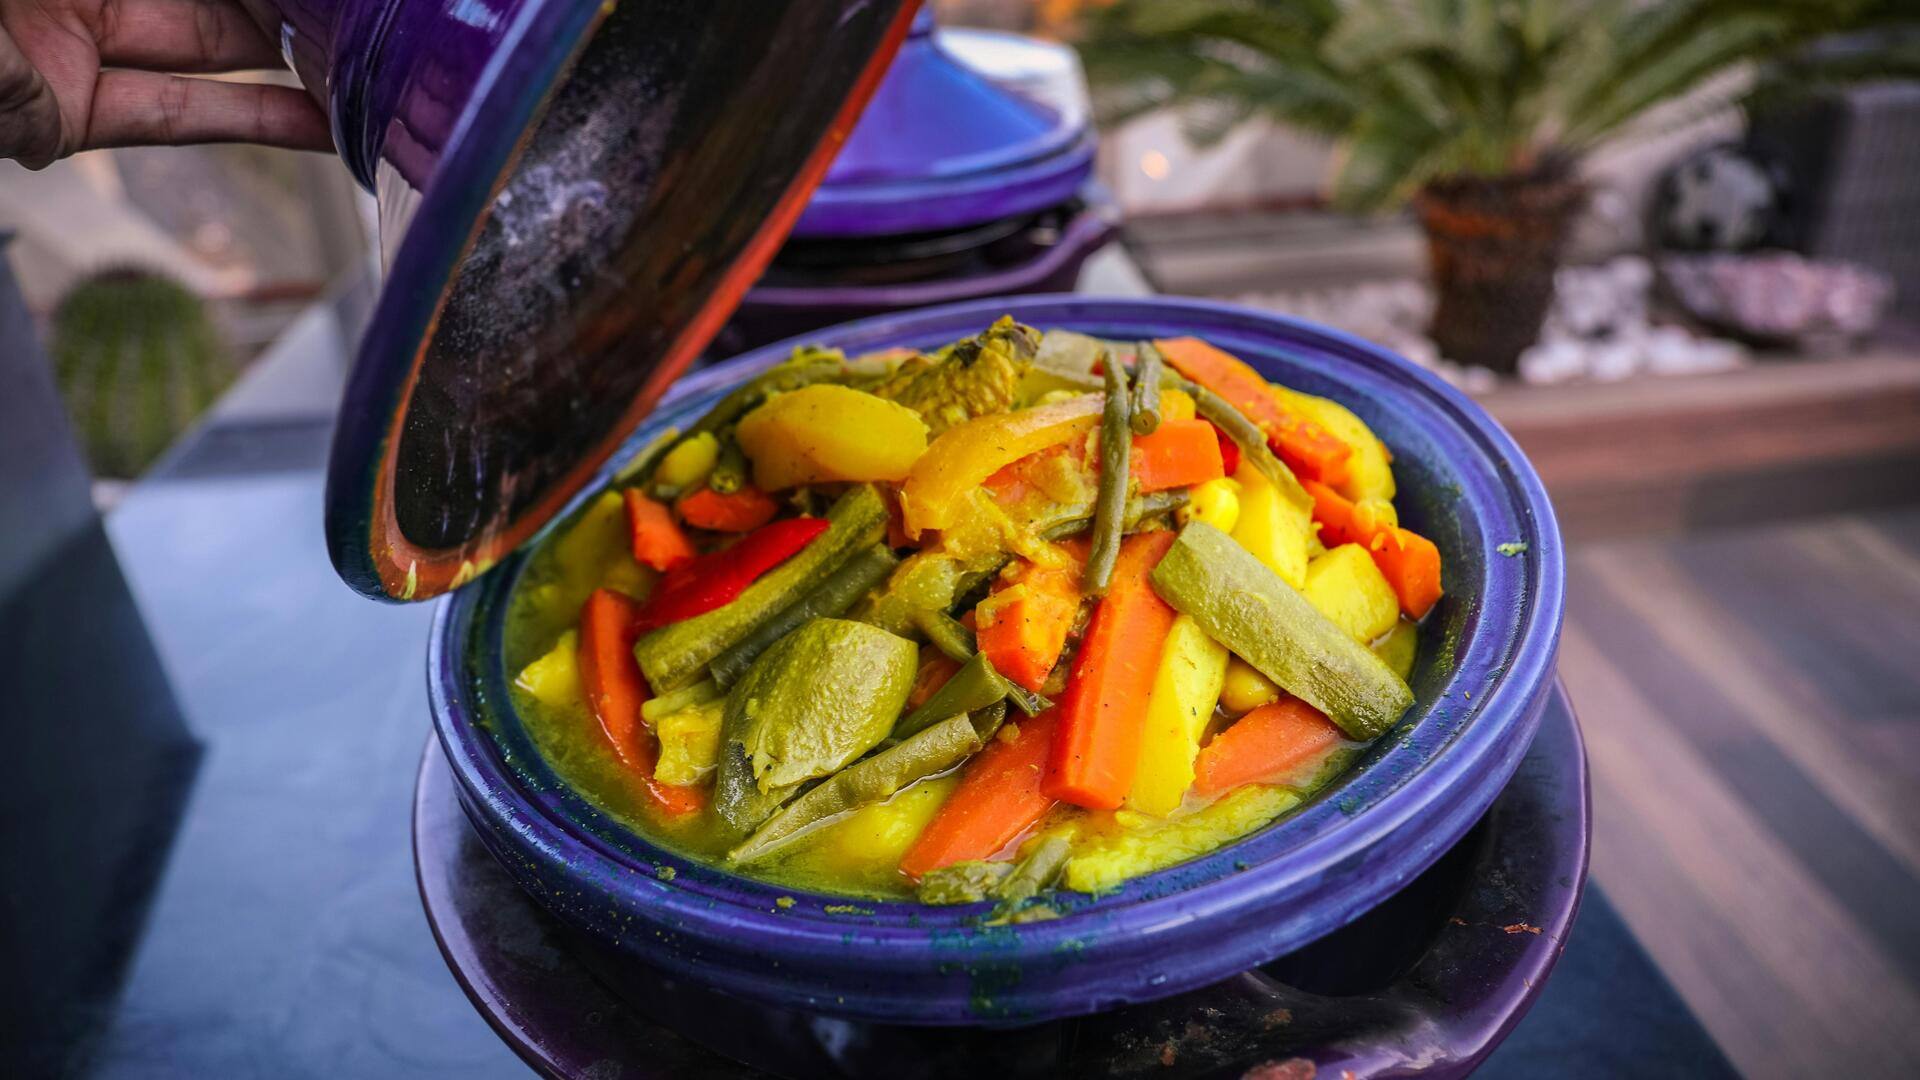 Try this classic vegetarian Moroccan tagine recipe at home